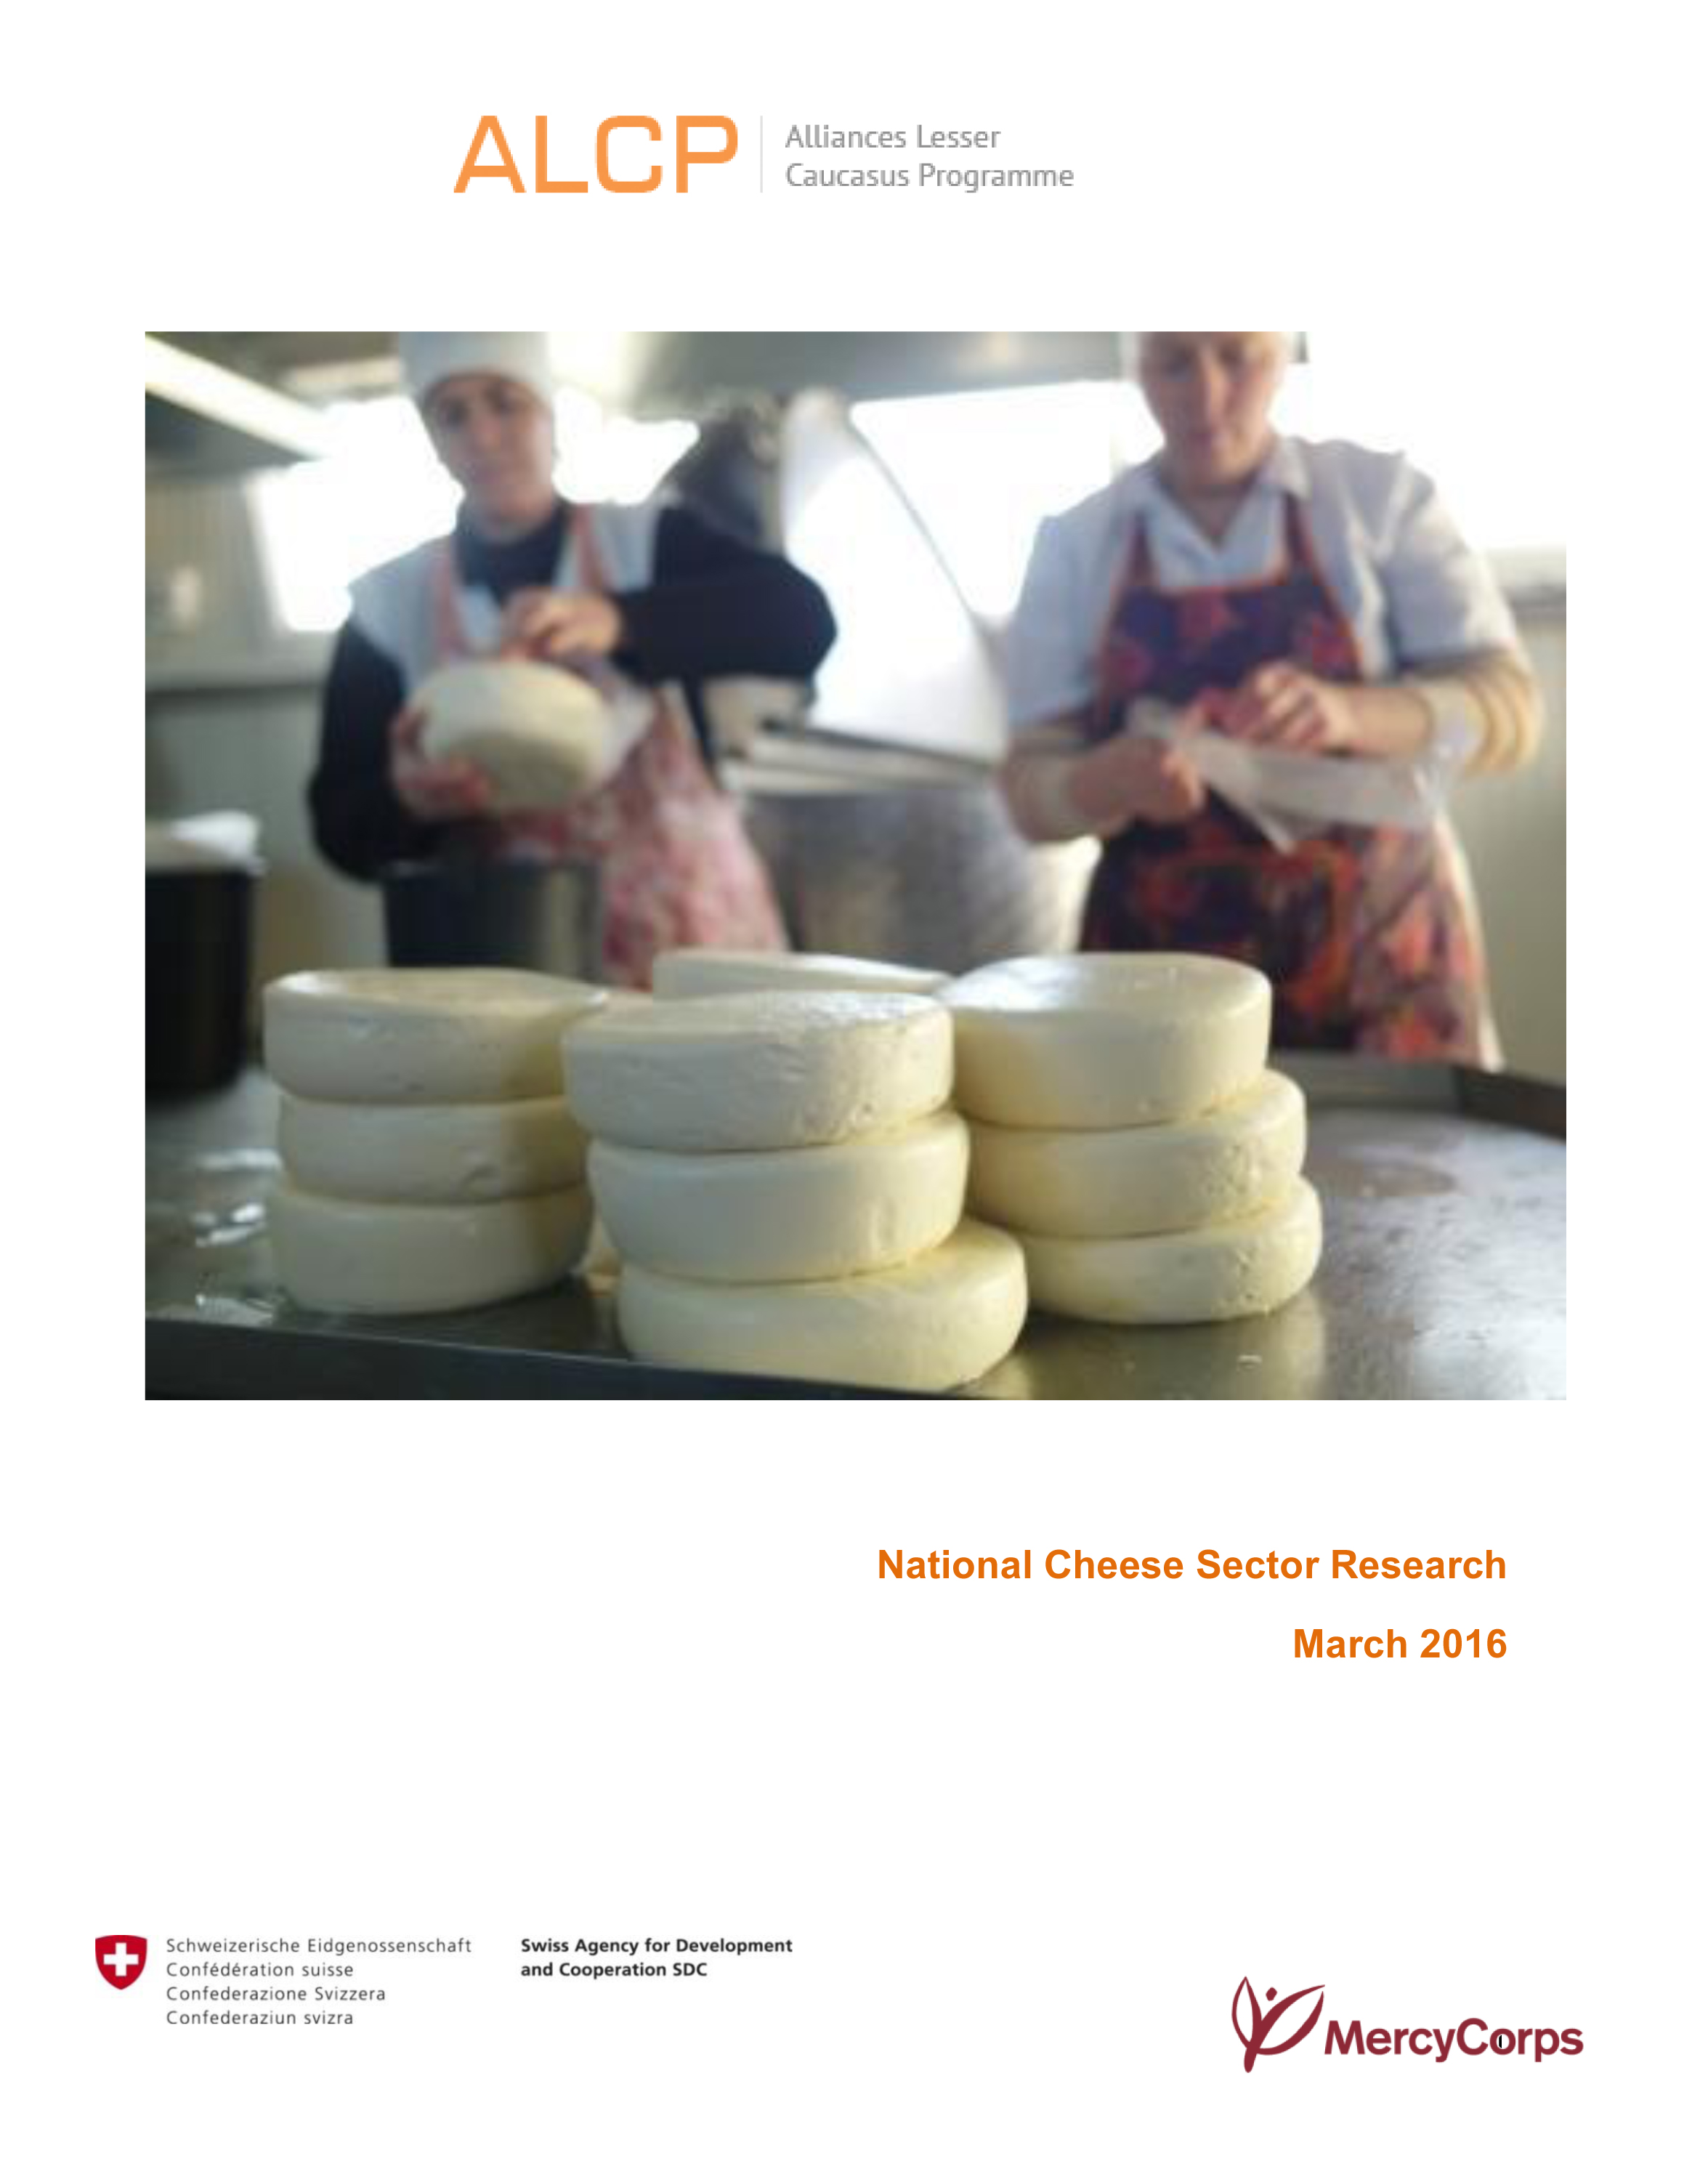 National Cheese Sector Research - March 2016